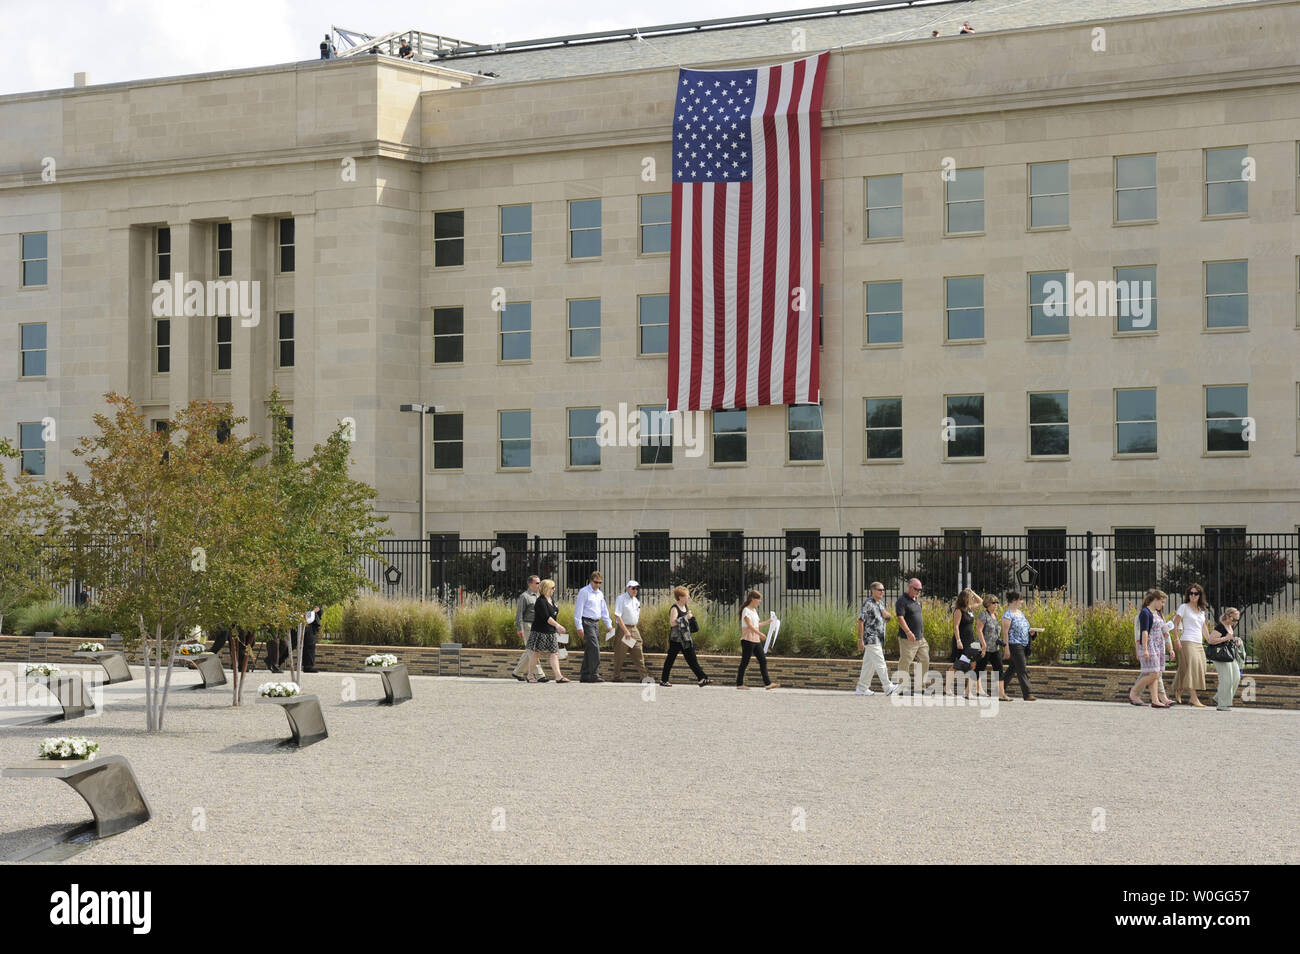 Family members of victims lost during the Pentagon attack walk through the Pentagon Memorial gardens, where wreaths were placed for each victim, and under a large American flag unfurled from the roof of the Pentagon duriing the the 10th anniversary ceremony, September 11, 2011, in Arlington, Virginia.  On September 1, 2001, high-jacked American Airlines flight 77 crashed into the Pentagon, killing all 64 passengers on board and 125 in the Pentagon.   UPI/Mike Theiler Stock Photo